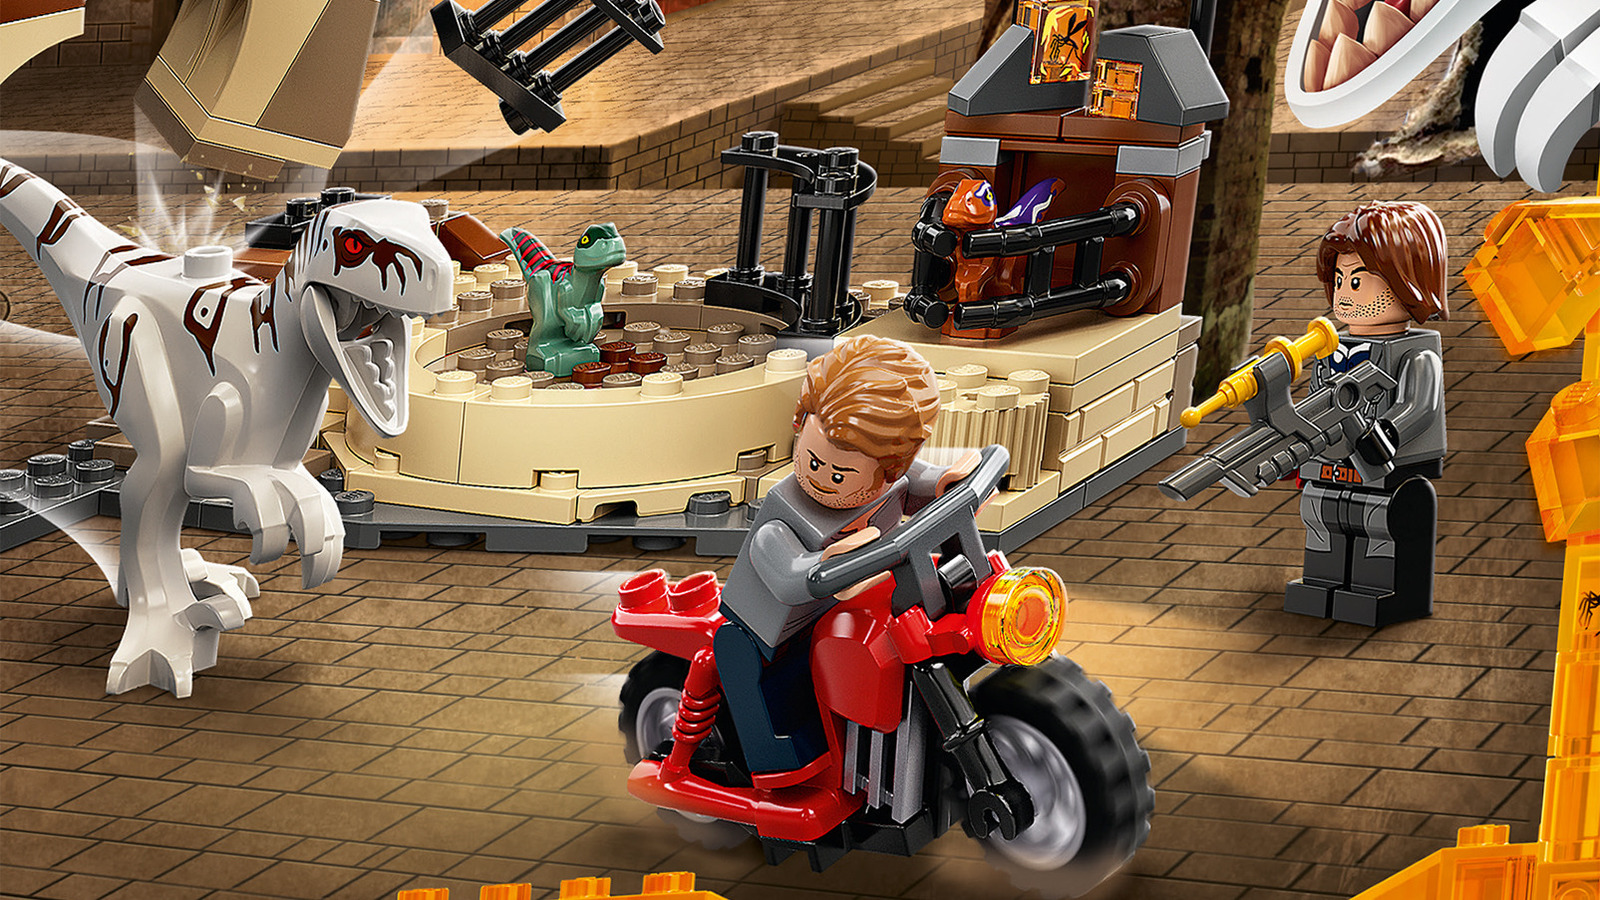 Jurassic World Dominion Lego Sets Are Packed With Dino Action And Maybe 